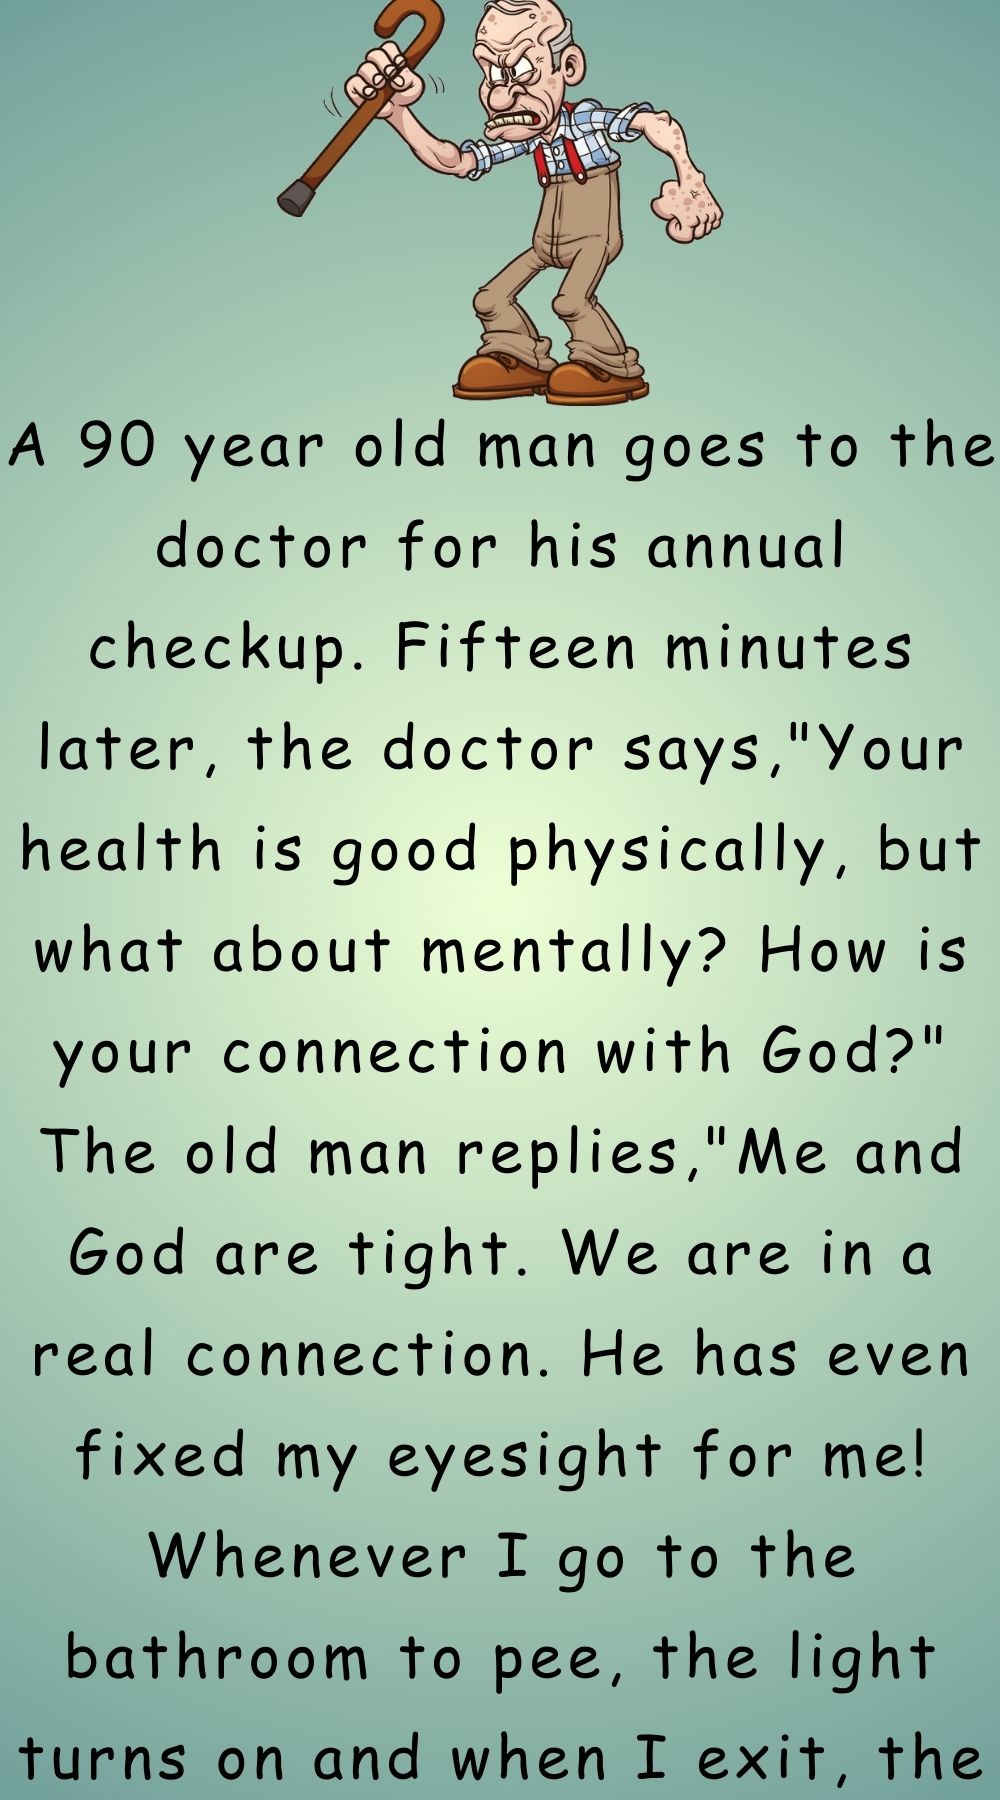 A 90 year old man goes to the doctor 